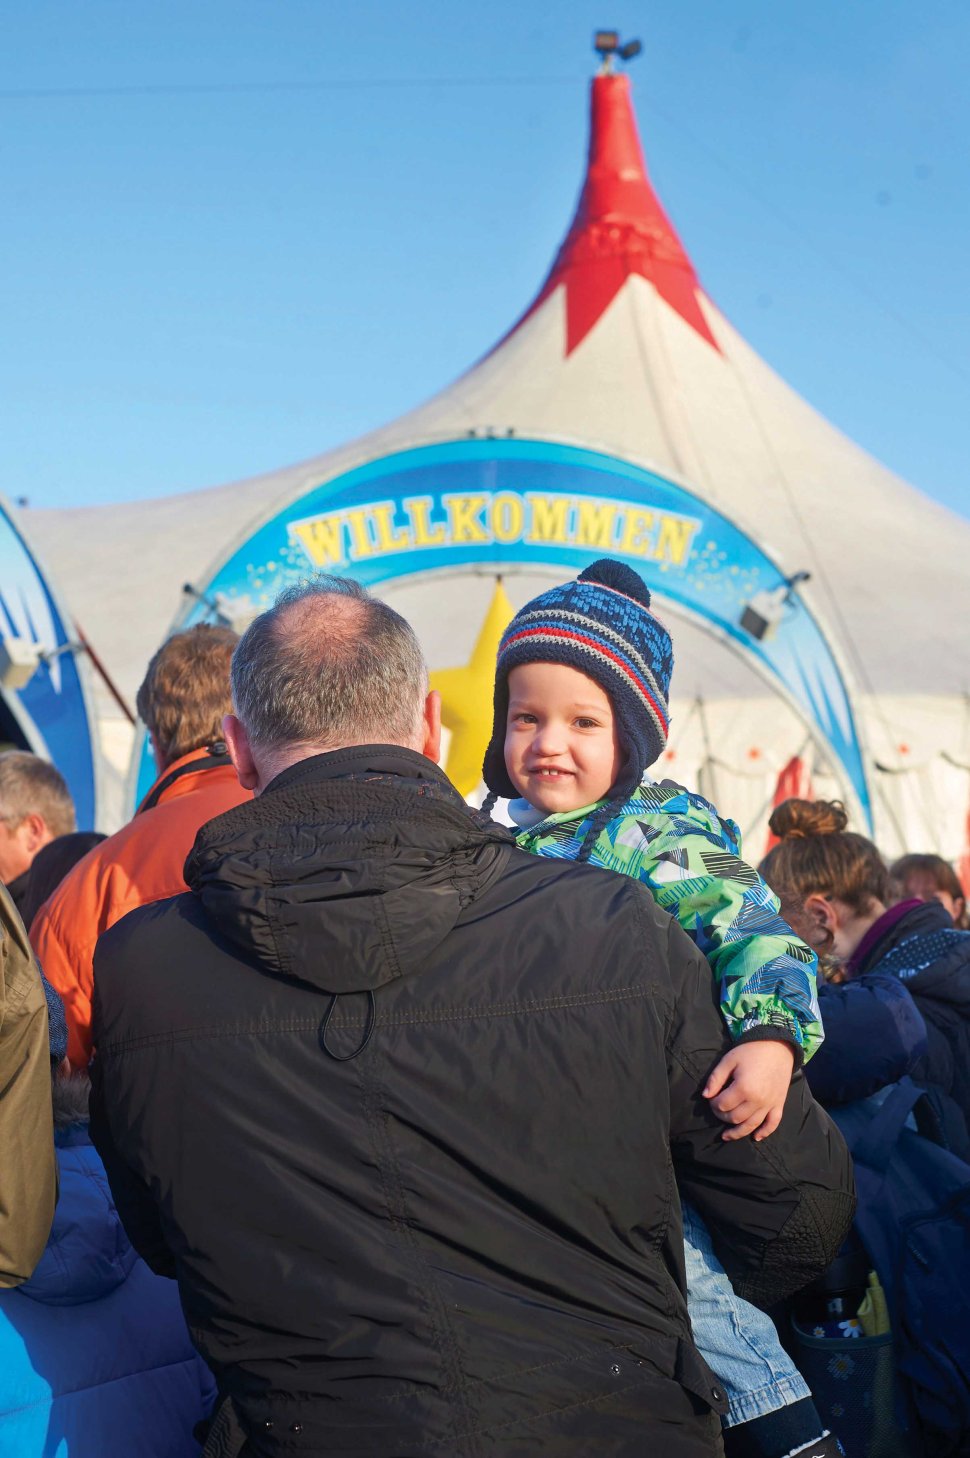 Nico (2) from Niedernhall at the entrance of the "Big Top" tent.